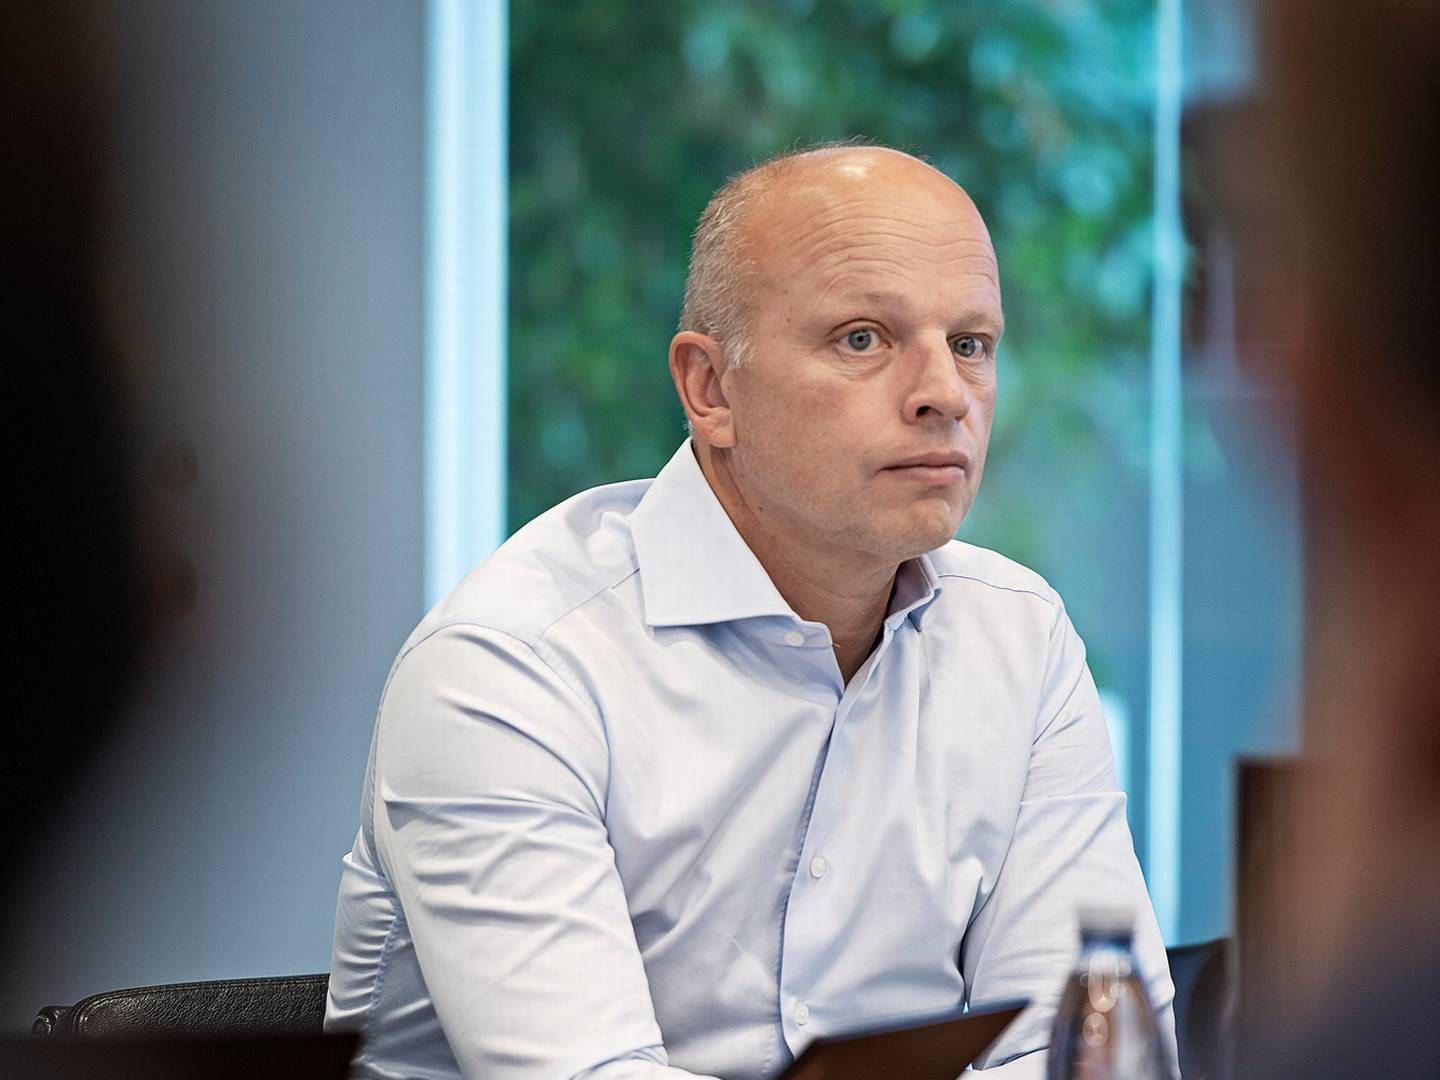 Jens Lund, who took over as CEO of DSV from Jens Bjørn Andersen on Feb. 1, said on an investor call after the financial figures were released that he expects the operational permits for the Neom joint venture to be in place by the second quarter of this year. | Photo: Pr / Dsv